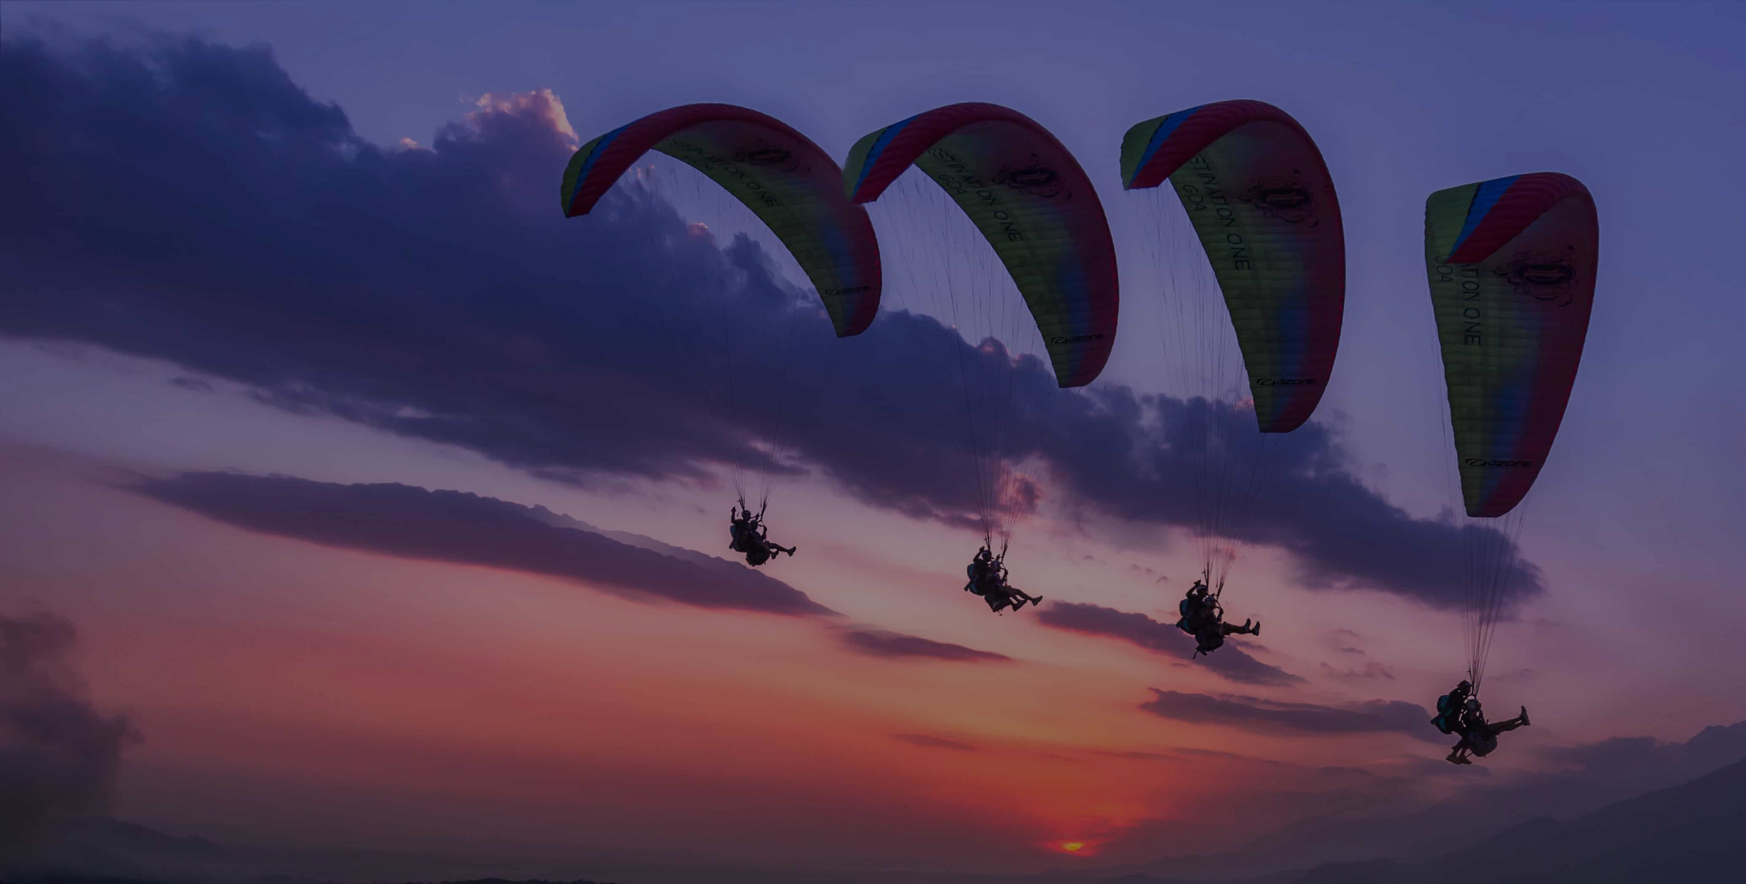 Learn to Glide with Confidence: Paragliding Course in Bir Billing